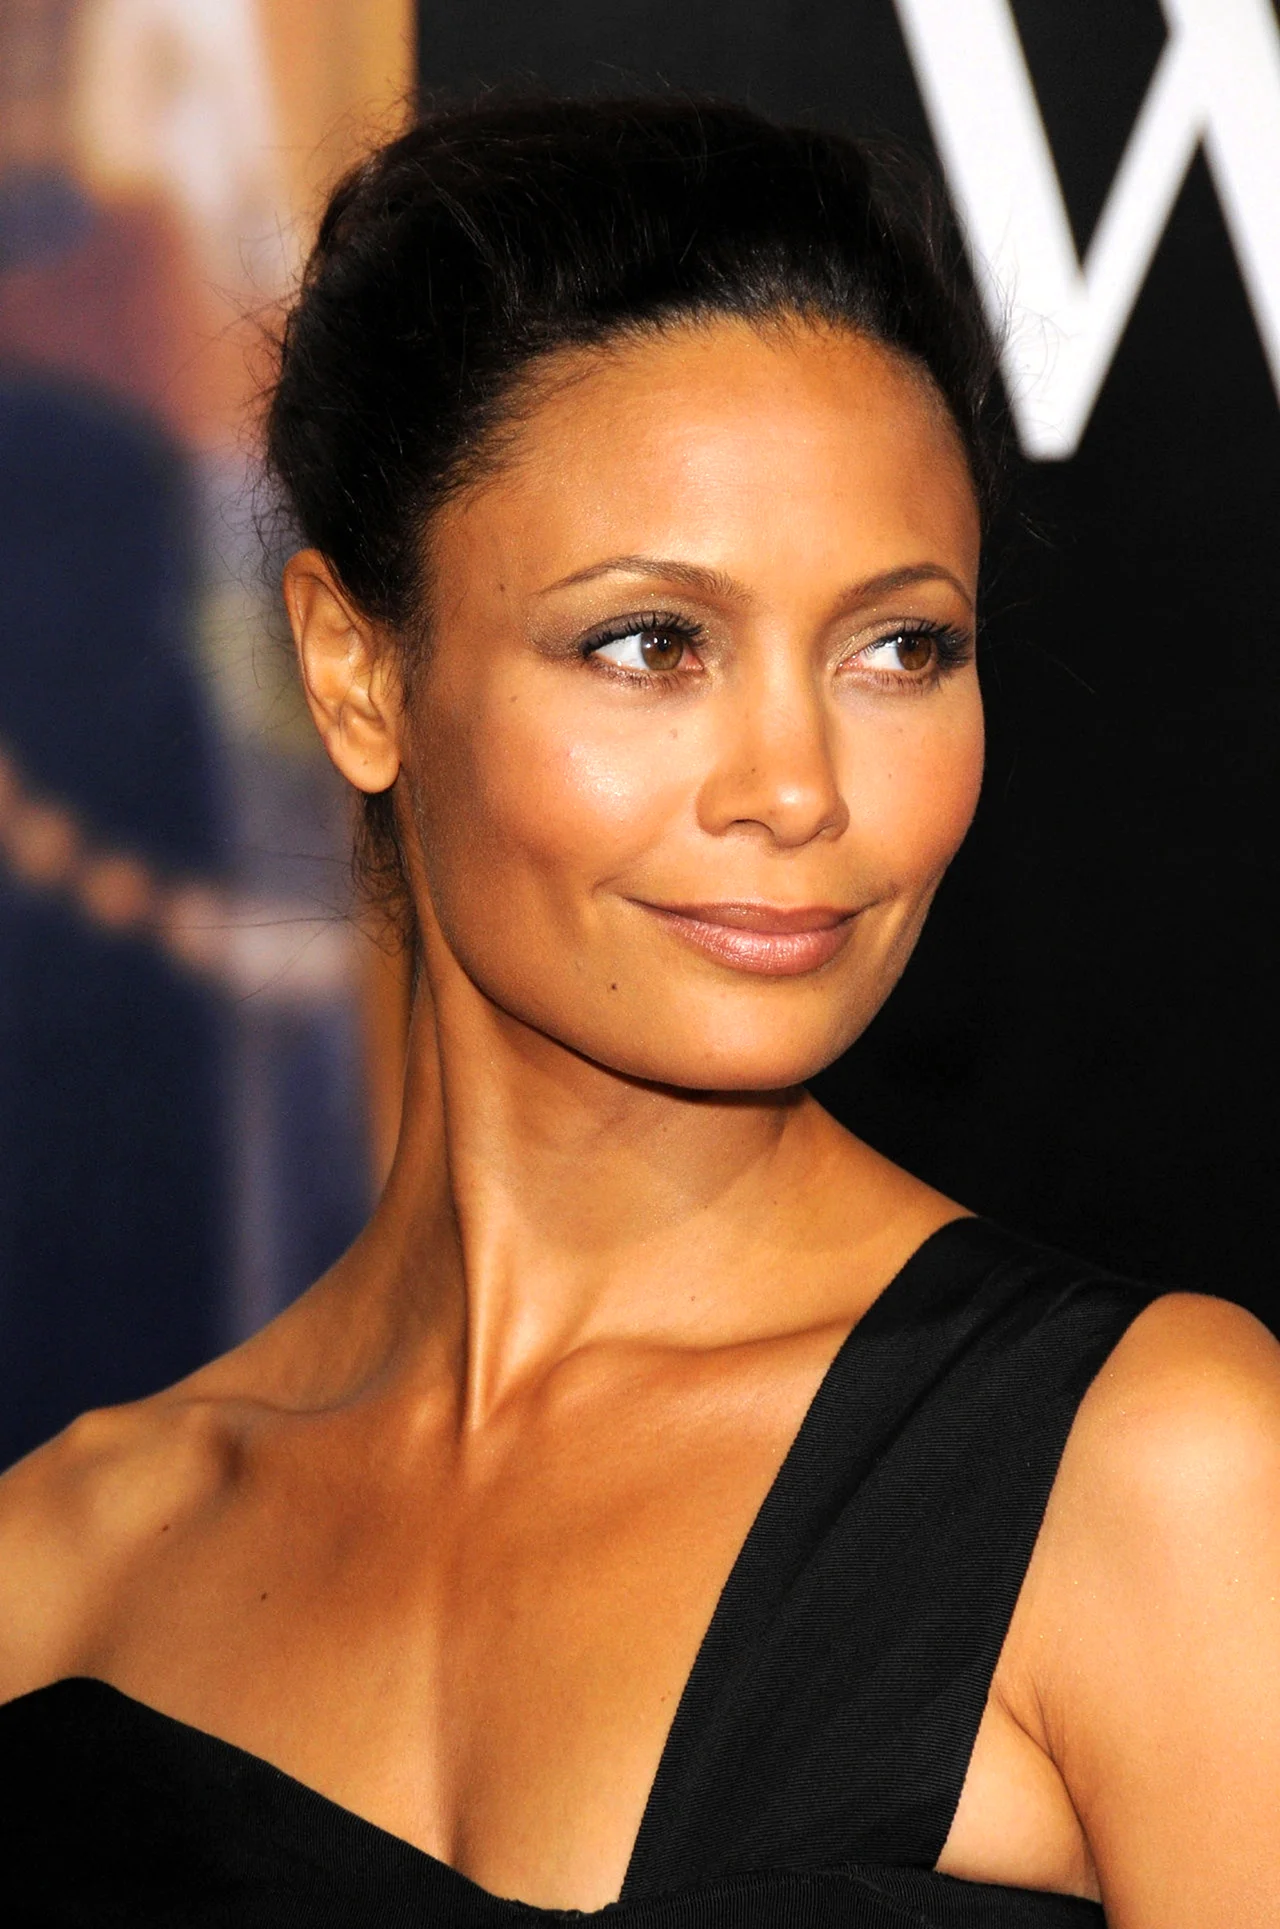 45 Thandie Newton Best Photos, Images & High-Res Pictures | WebRelax